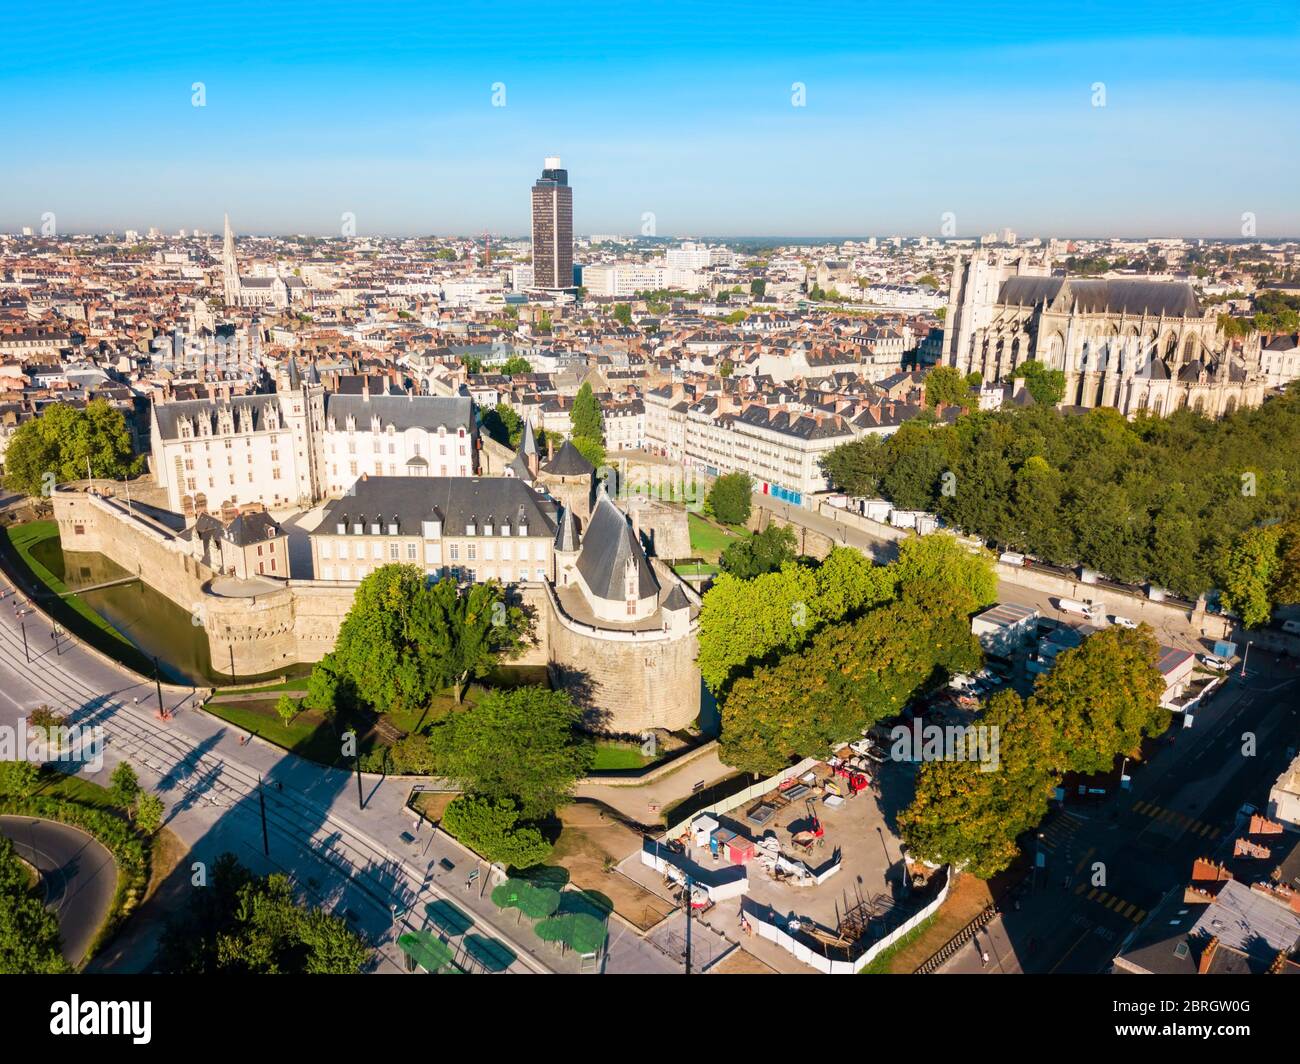 Nantes Aerial Panoramic View Nantes Is A City In Loire Atlantique Region In France Stock Photo Alamy